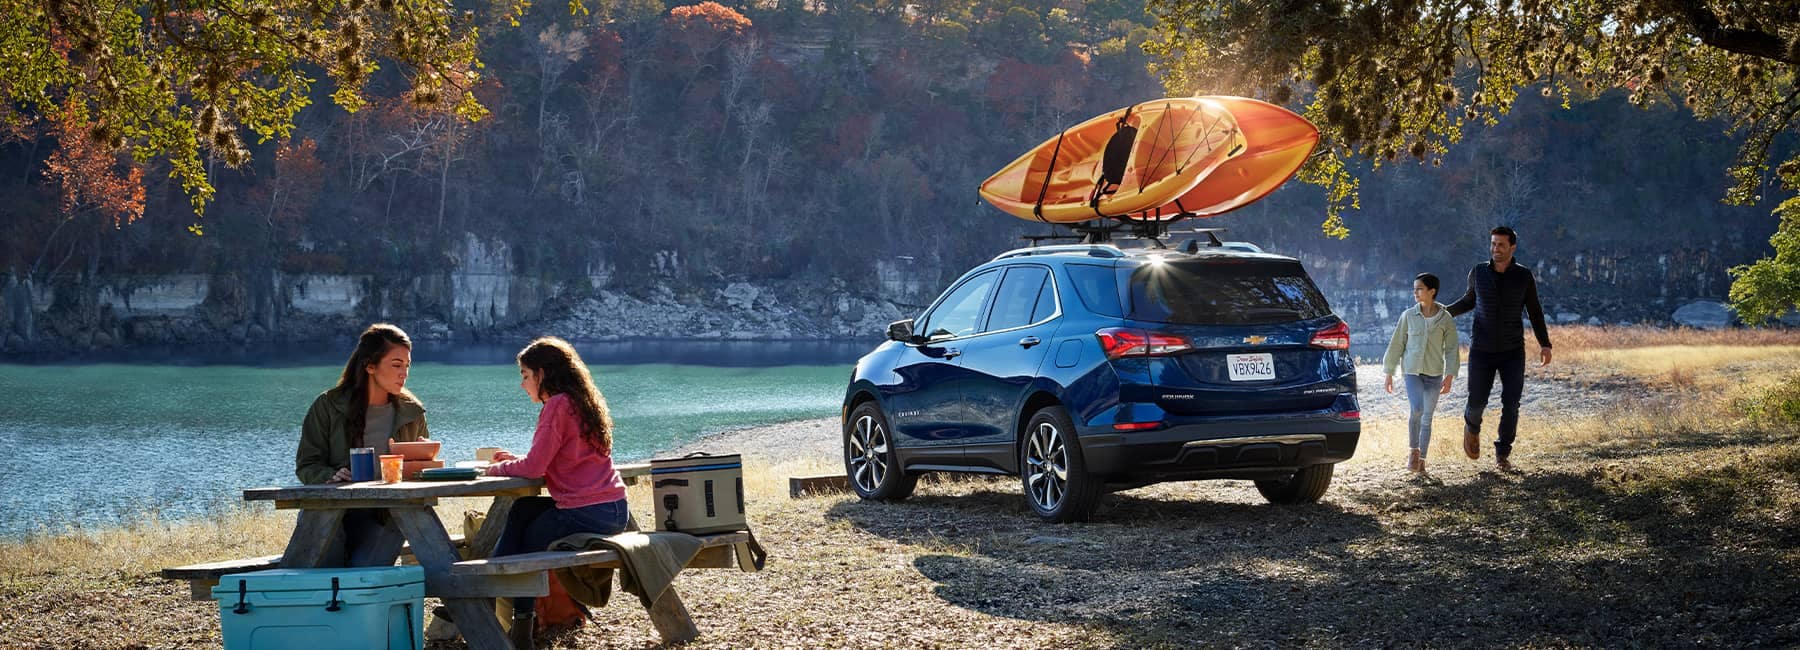 Family camping in Equinox